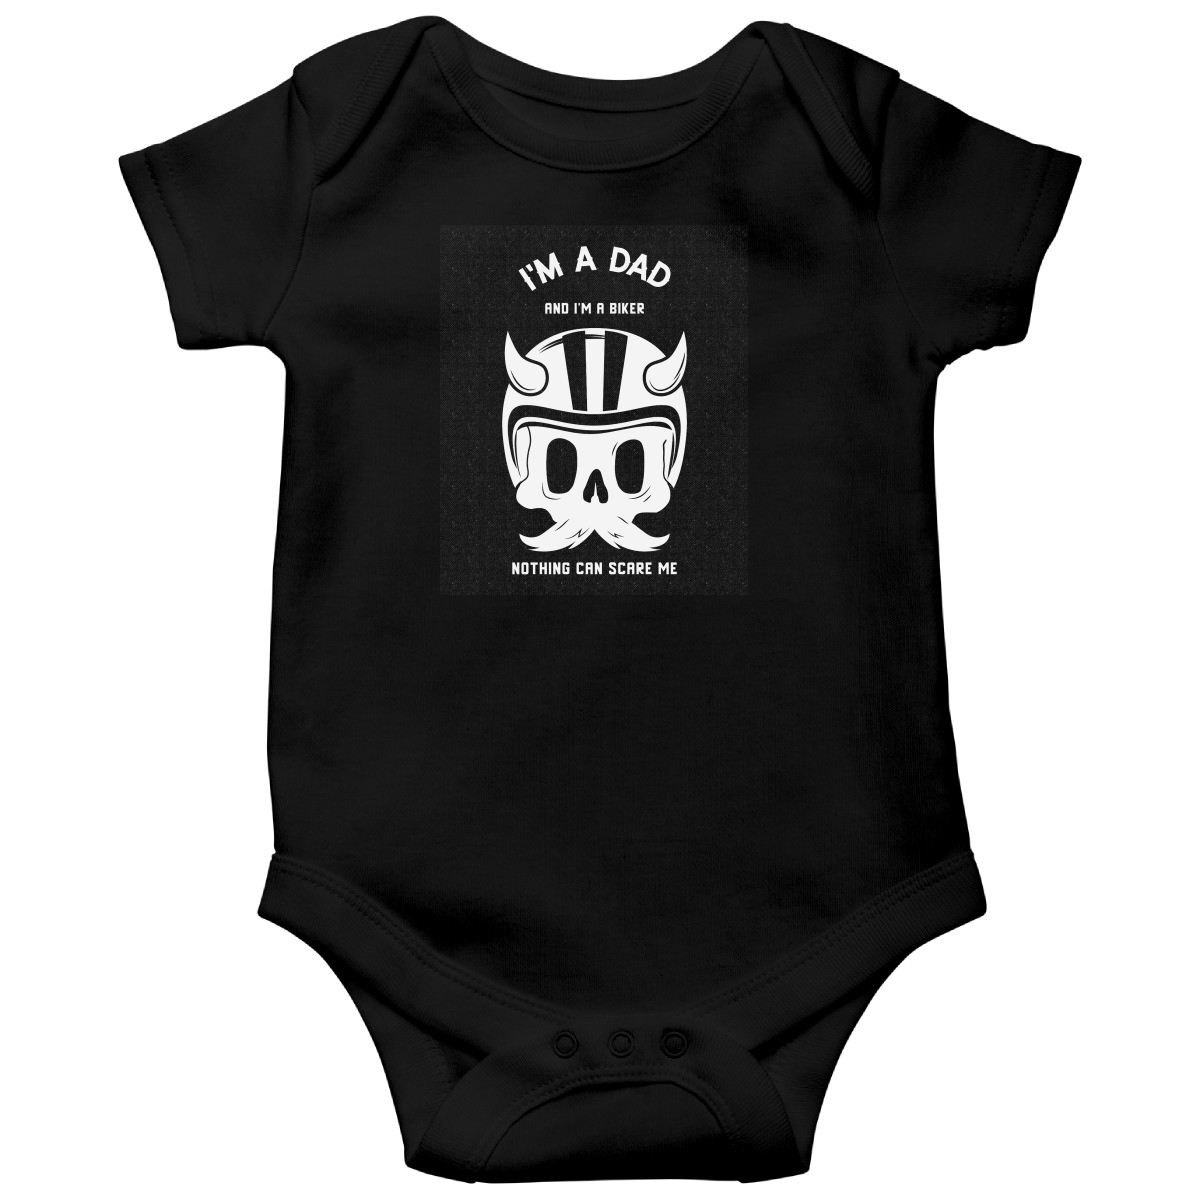 I'm a dad and a biker Baby Bodysuits | Black